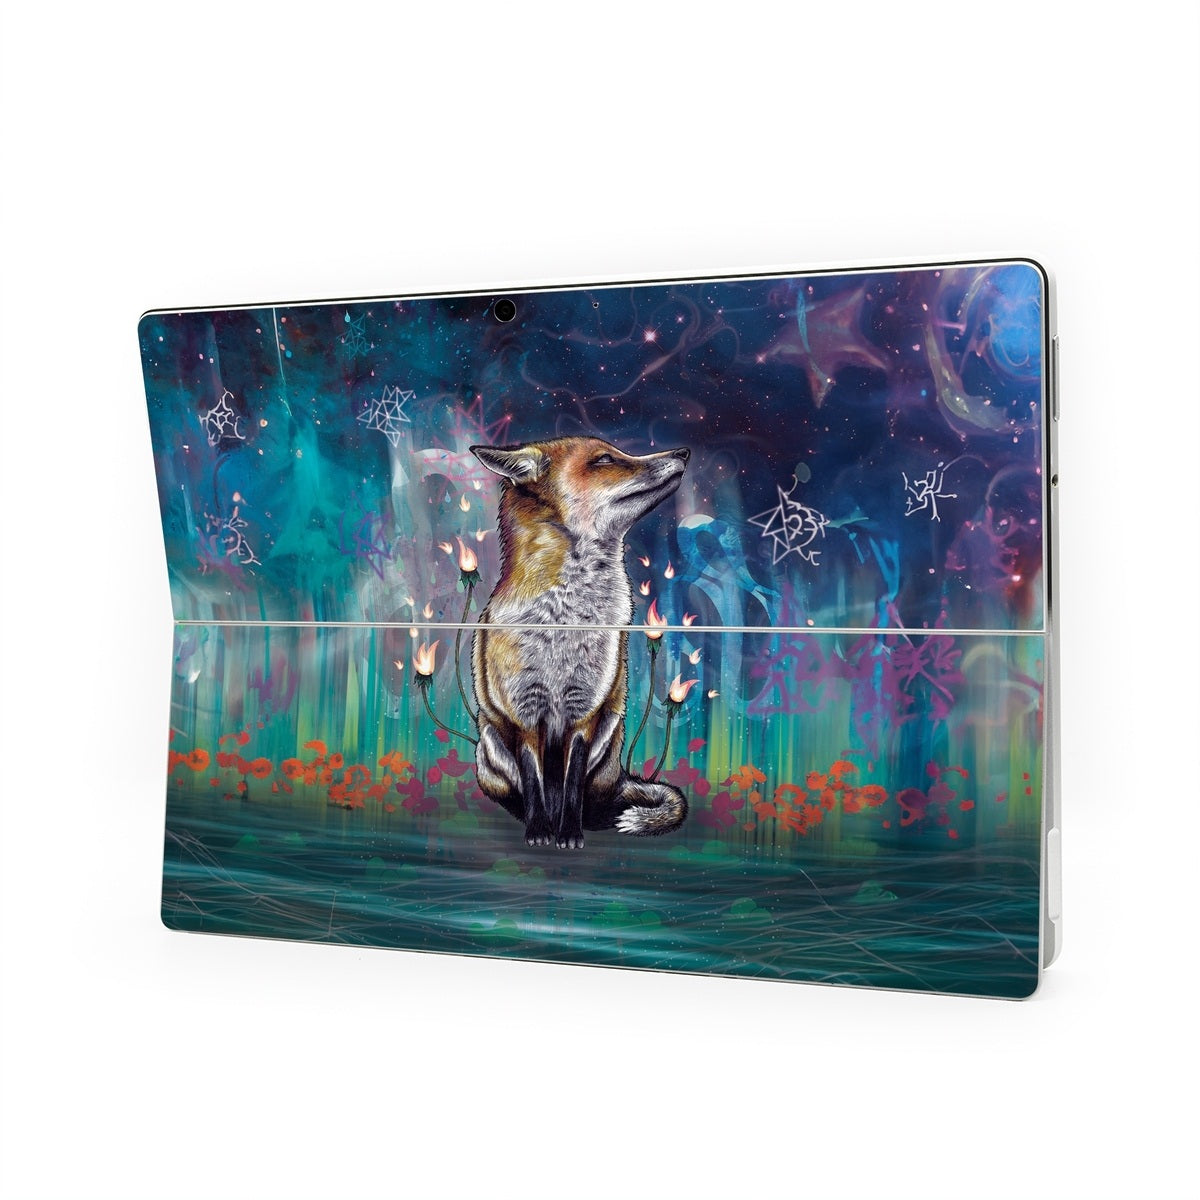 There is a Light - Microsoft Surface Pro Skin